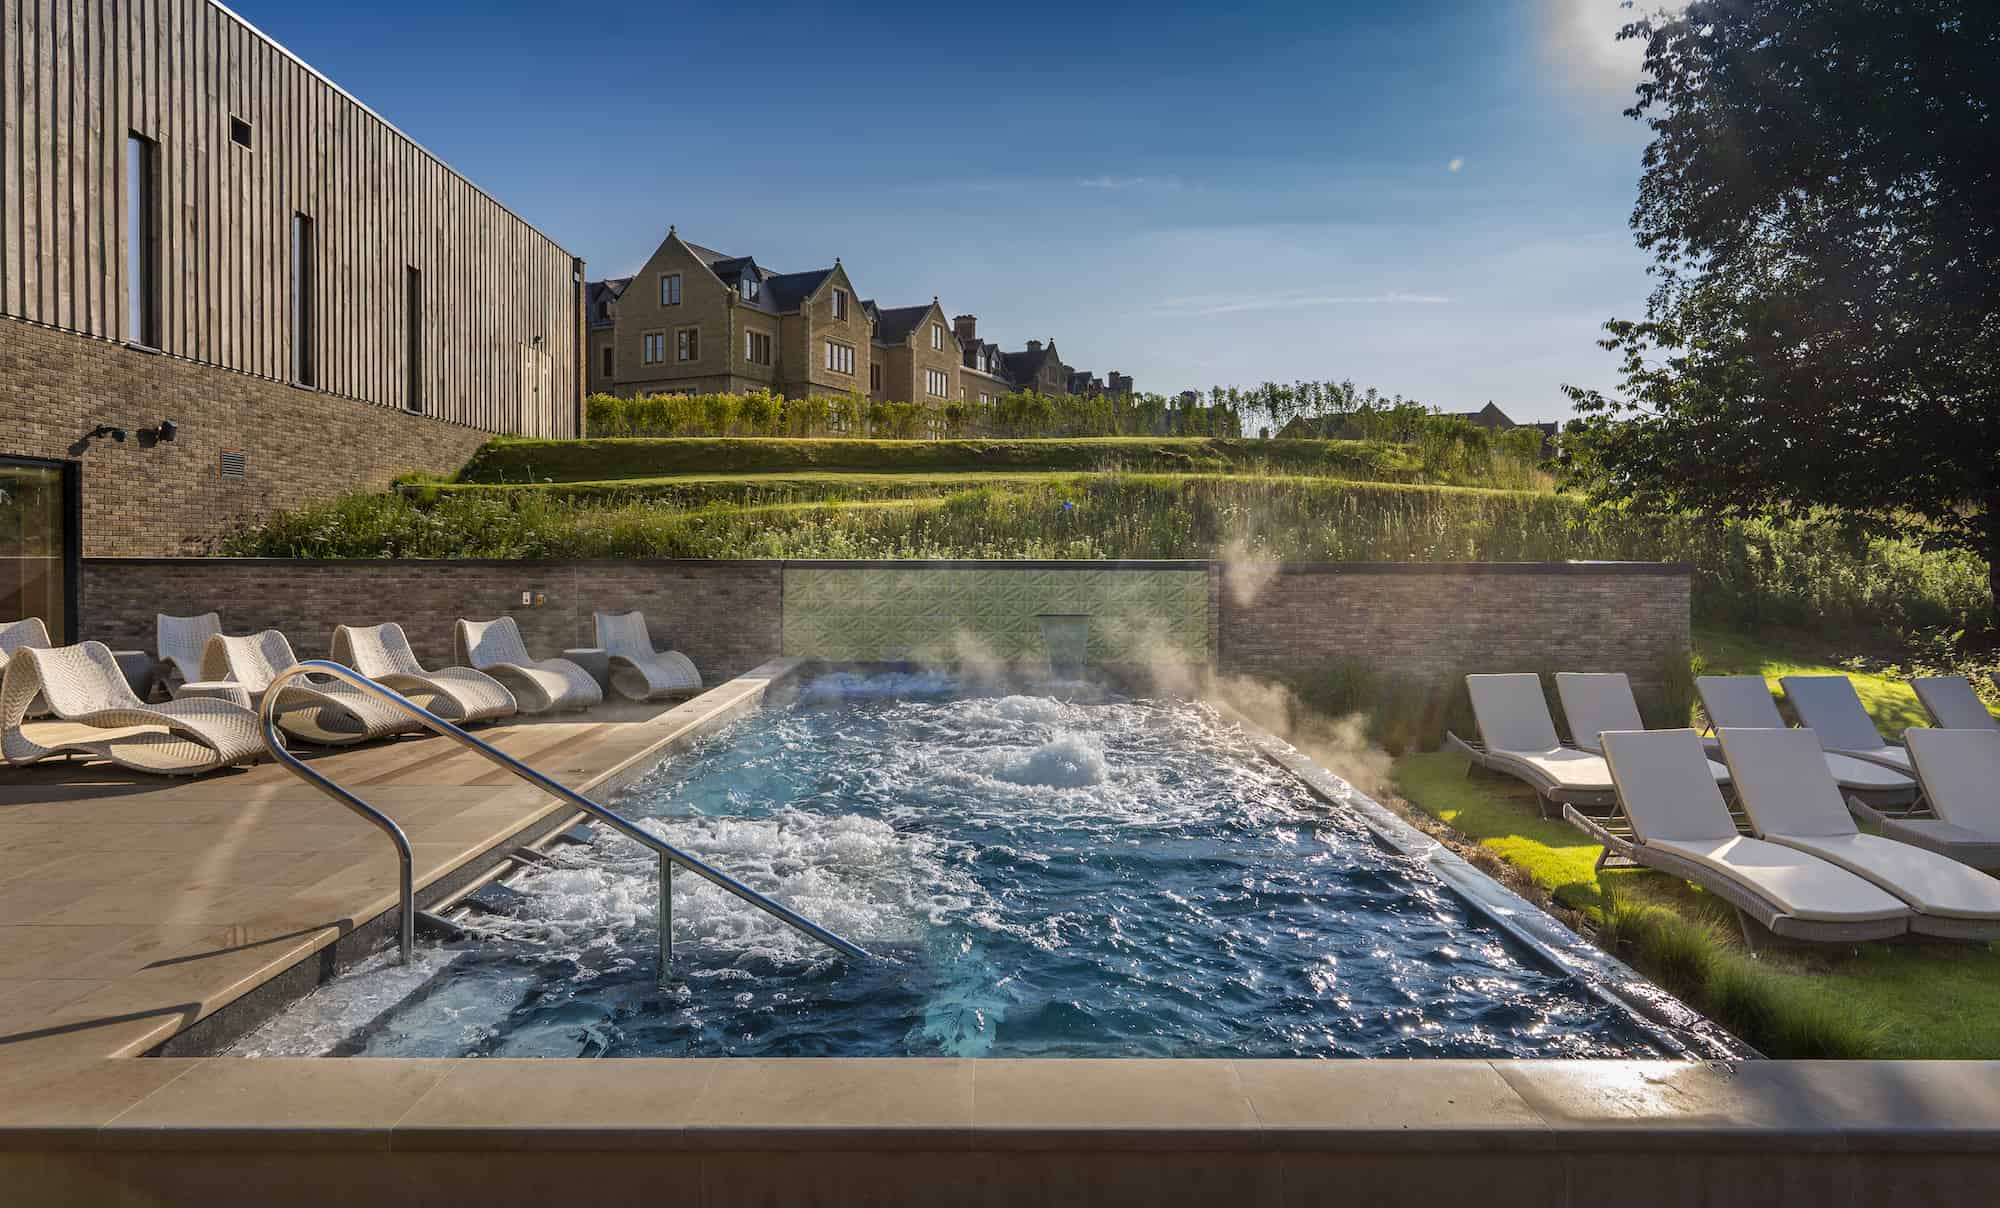 The outdoor hydrotherapy pool at The Spa at South Lodge 